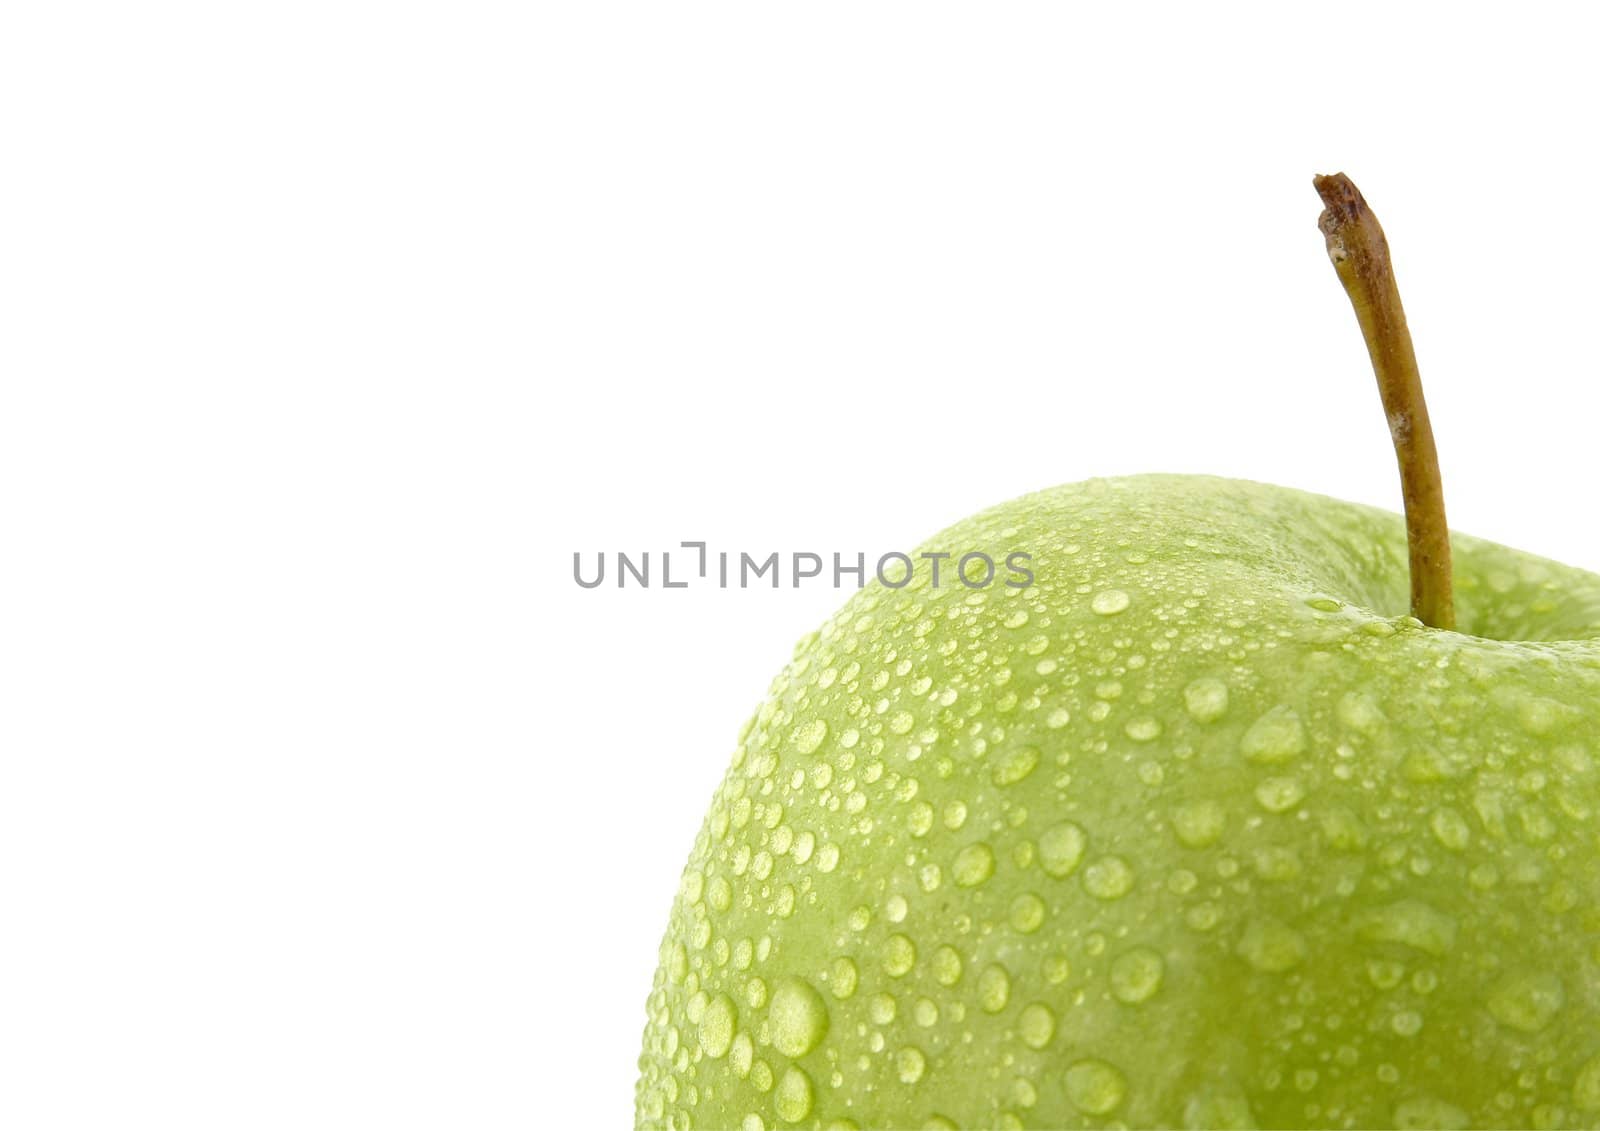 Green apple with water drops by Baltus